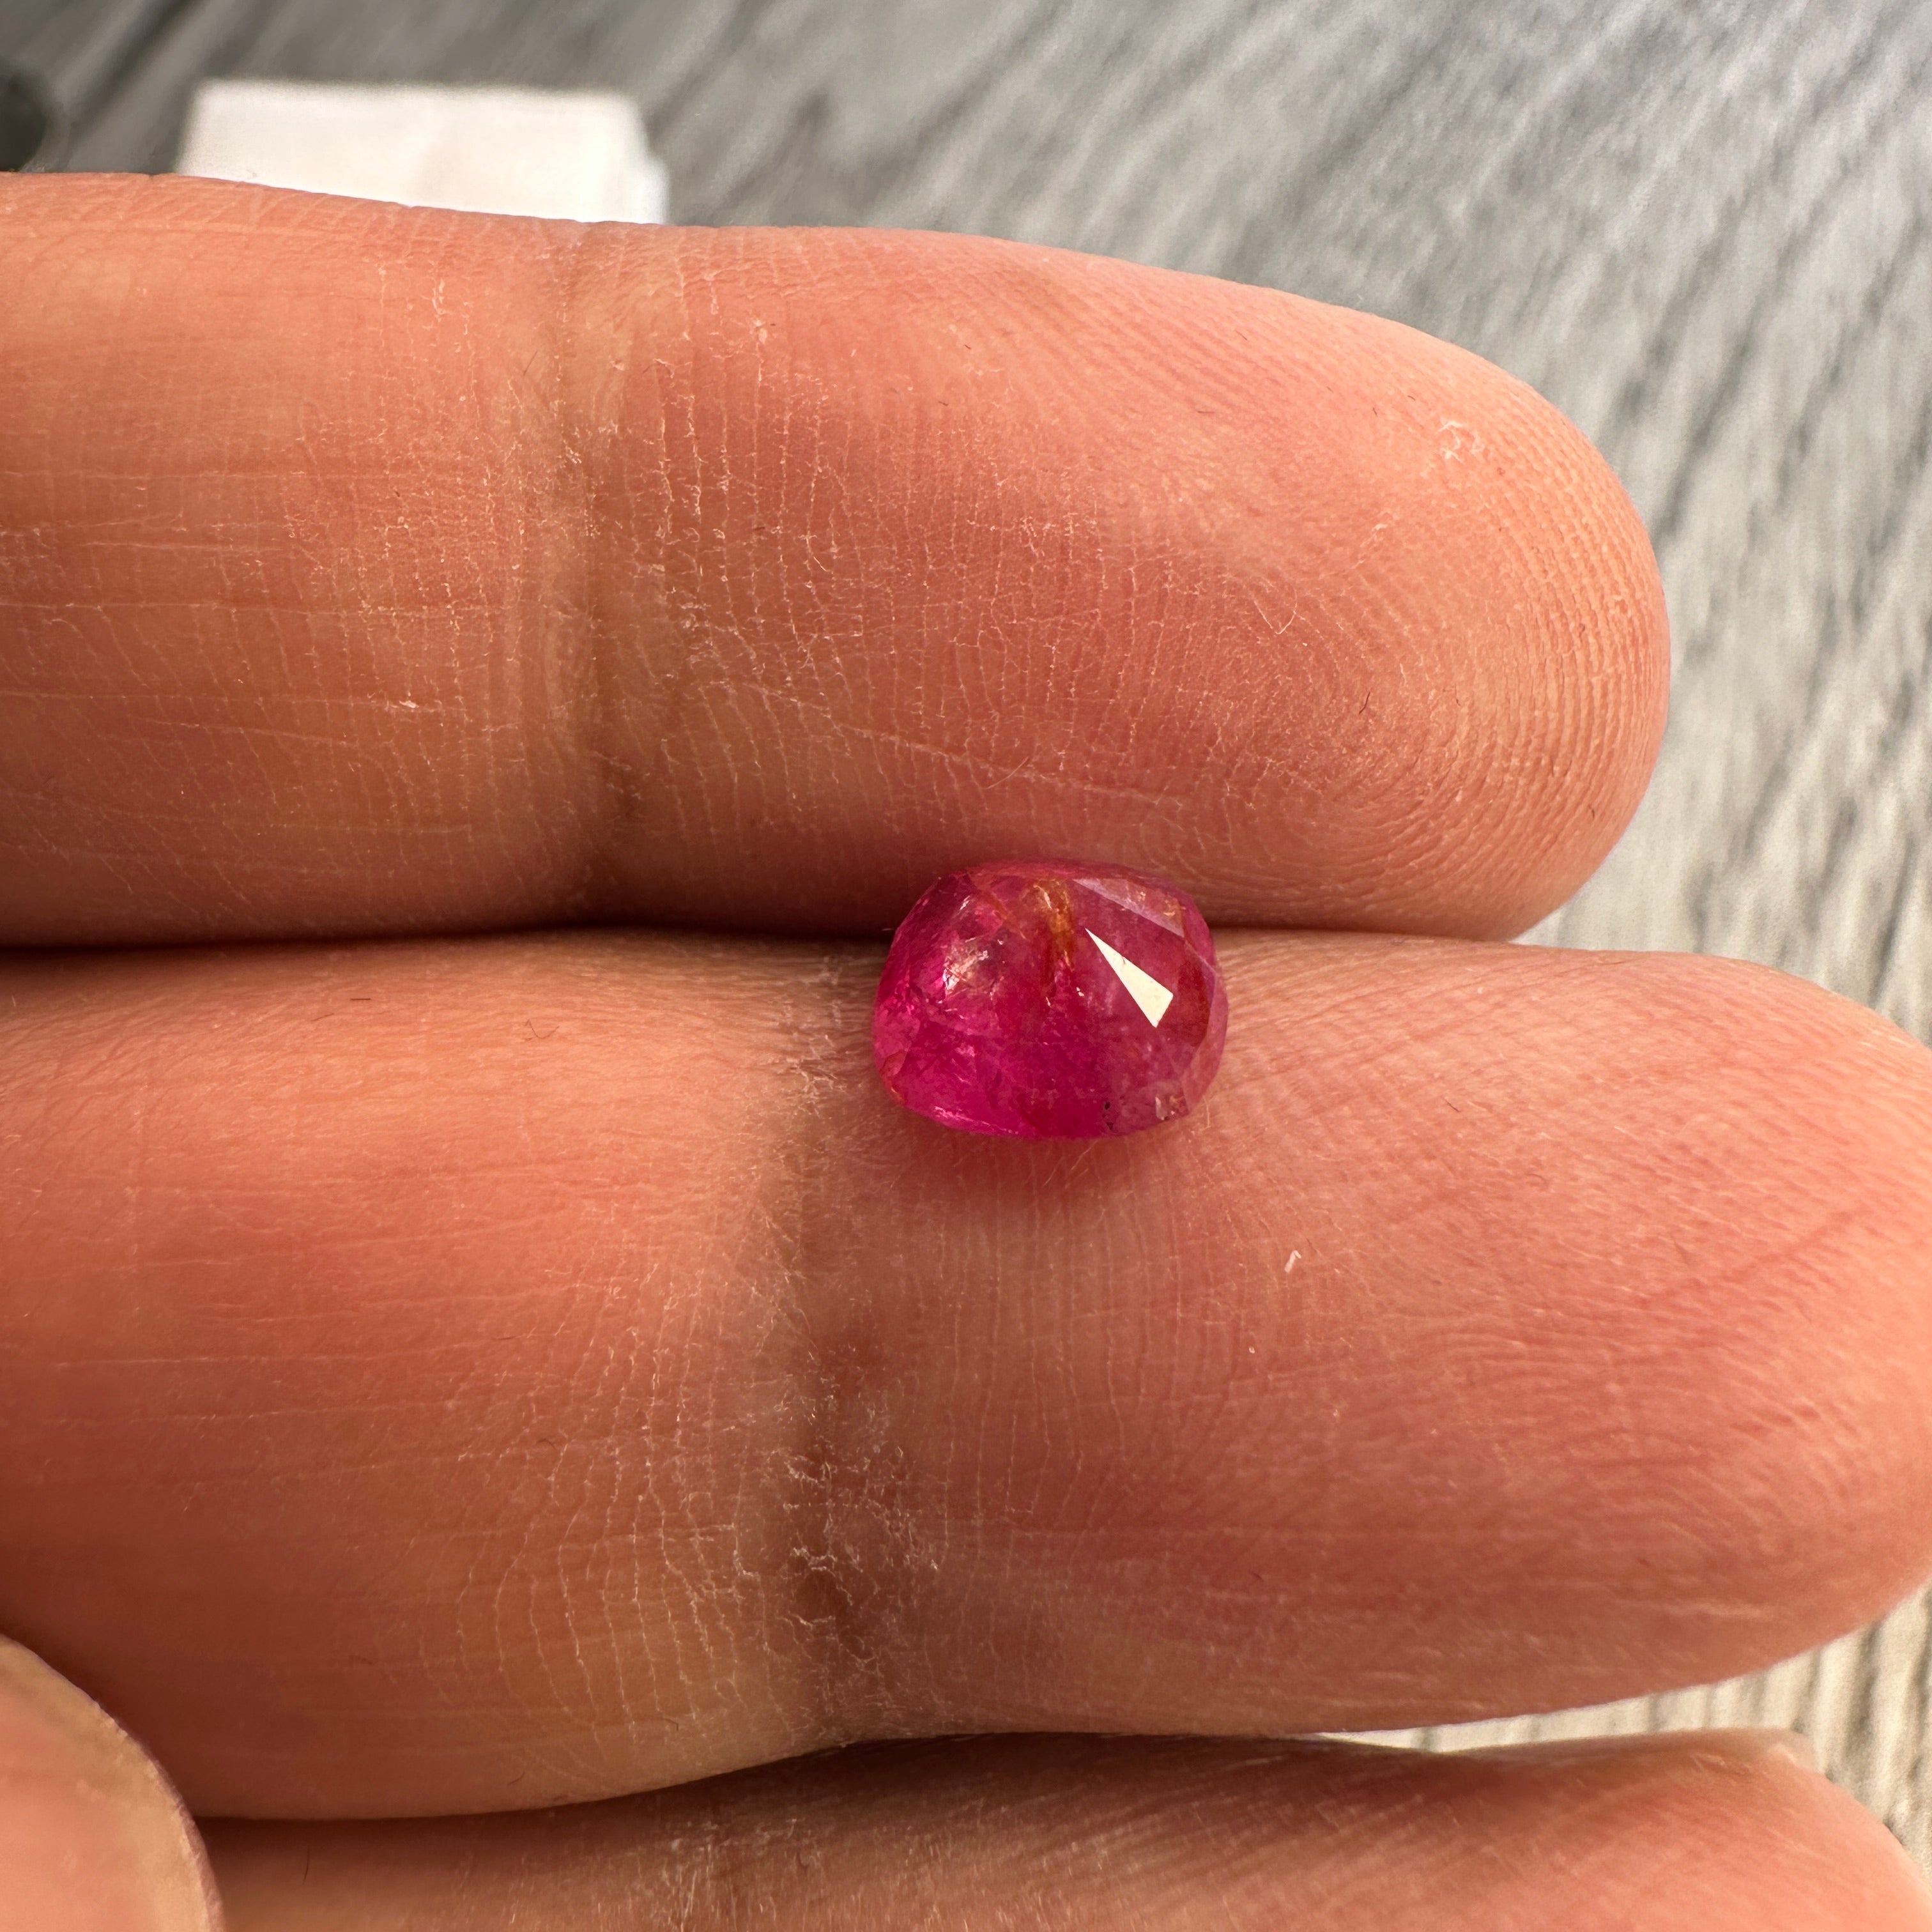 1.89ct Winza Ruby, Tanzania, Untreated, Unheated. Has inclusions